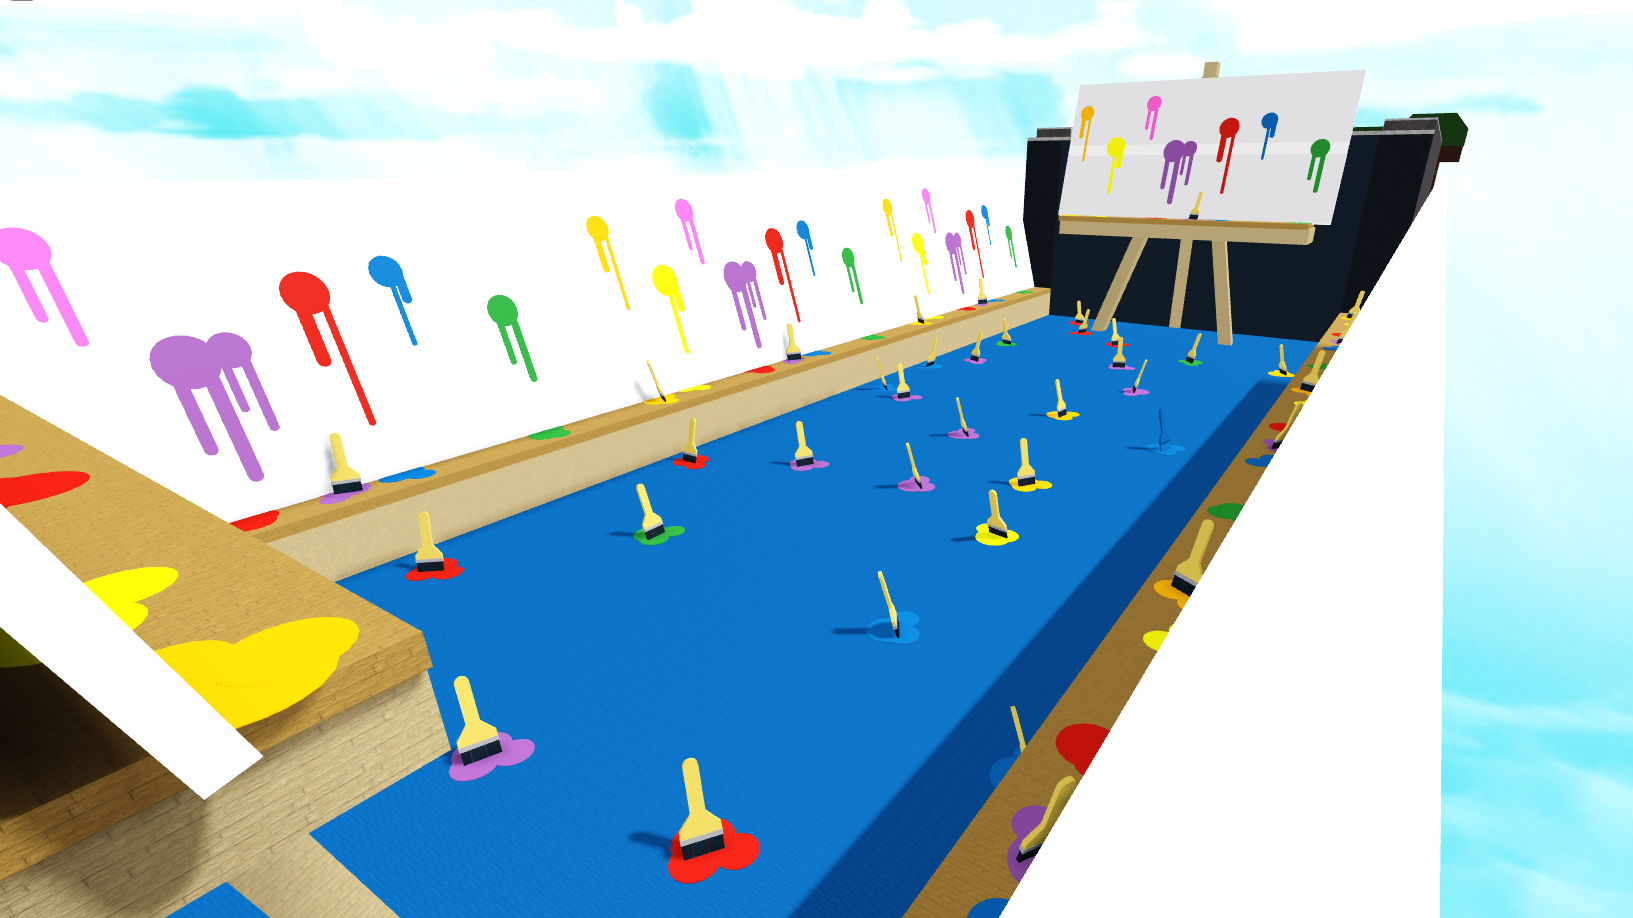 Paint Brush Stage Build A Boat For Treasure Wiki Fandom - roblox build a boat codes 2019 august